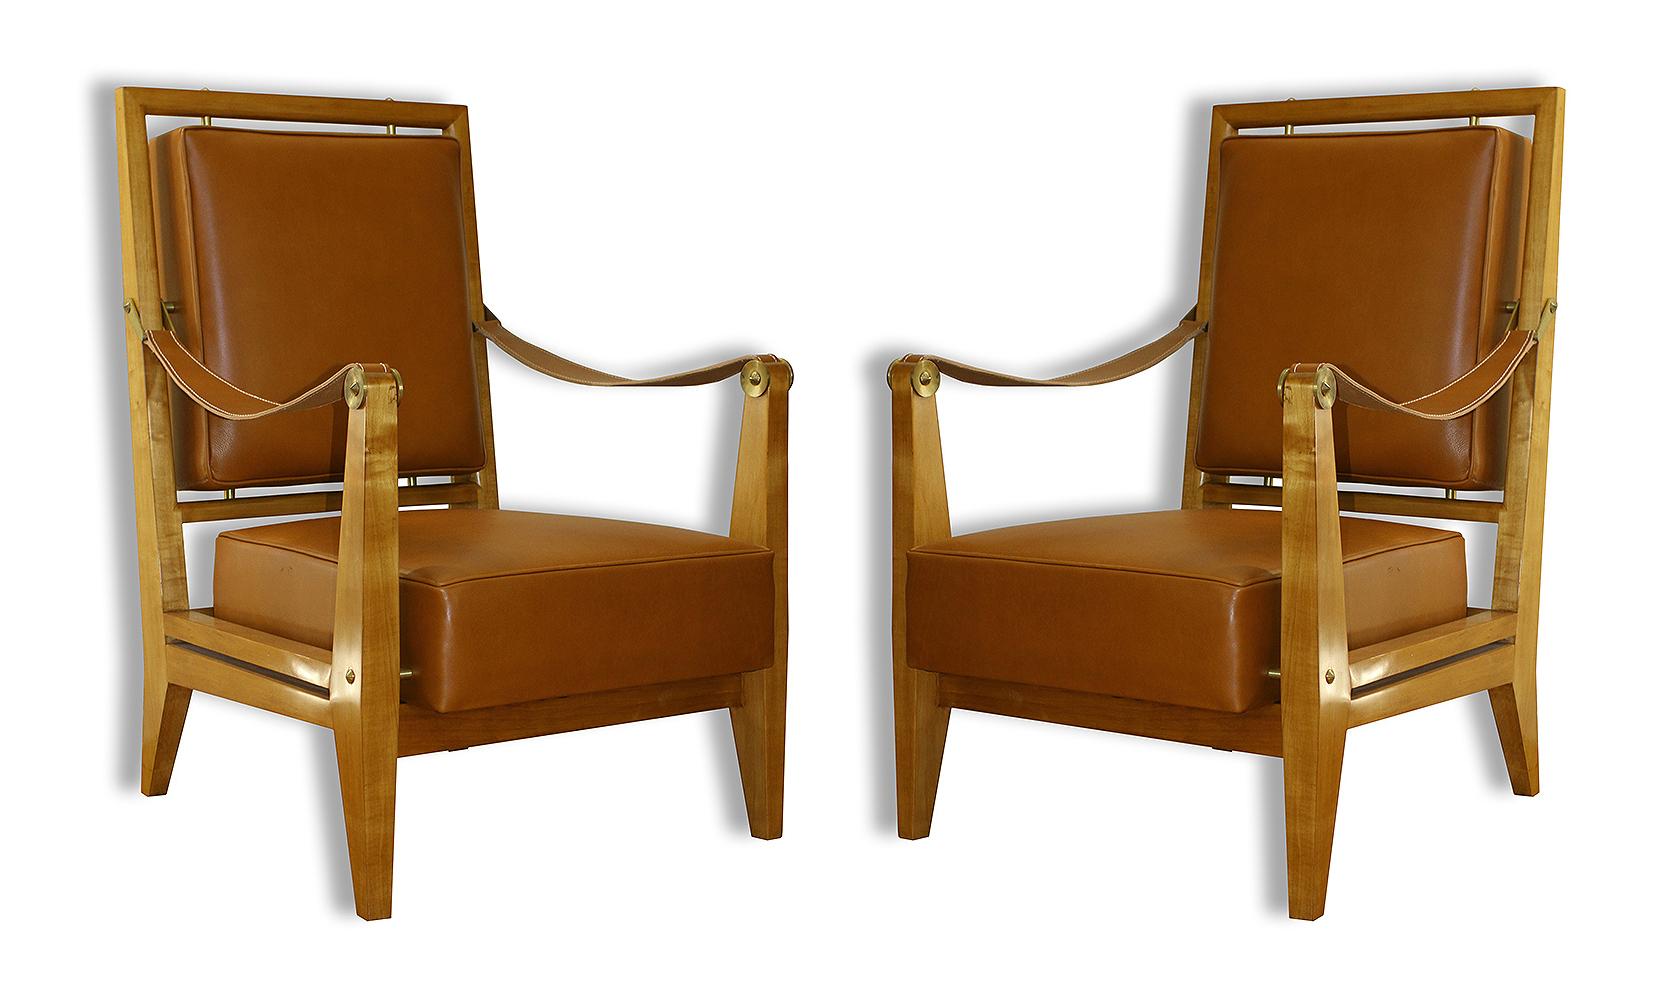 Maxime Old, Rare pair of armchairs from the Marhaba Hotel in Morocco For Sale 2